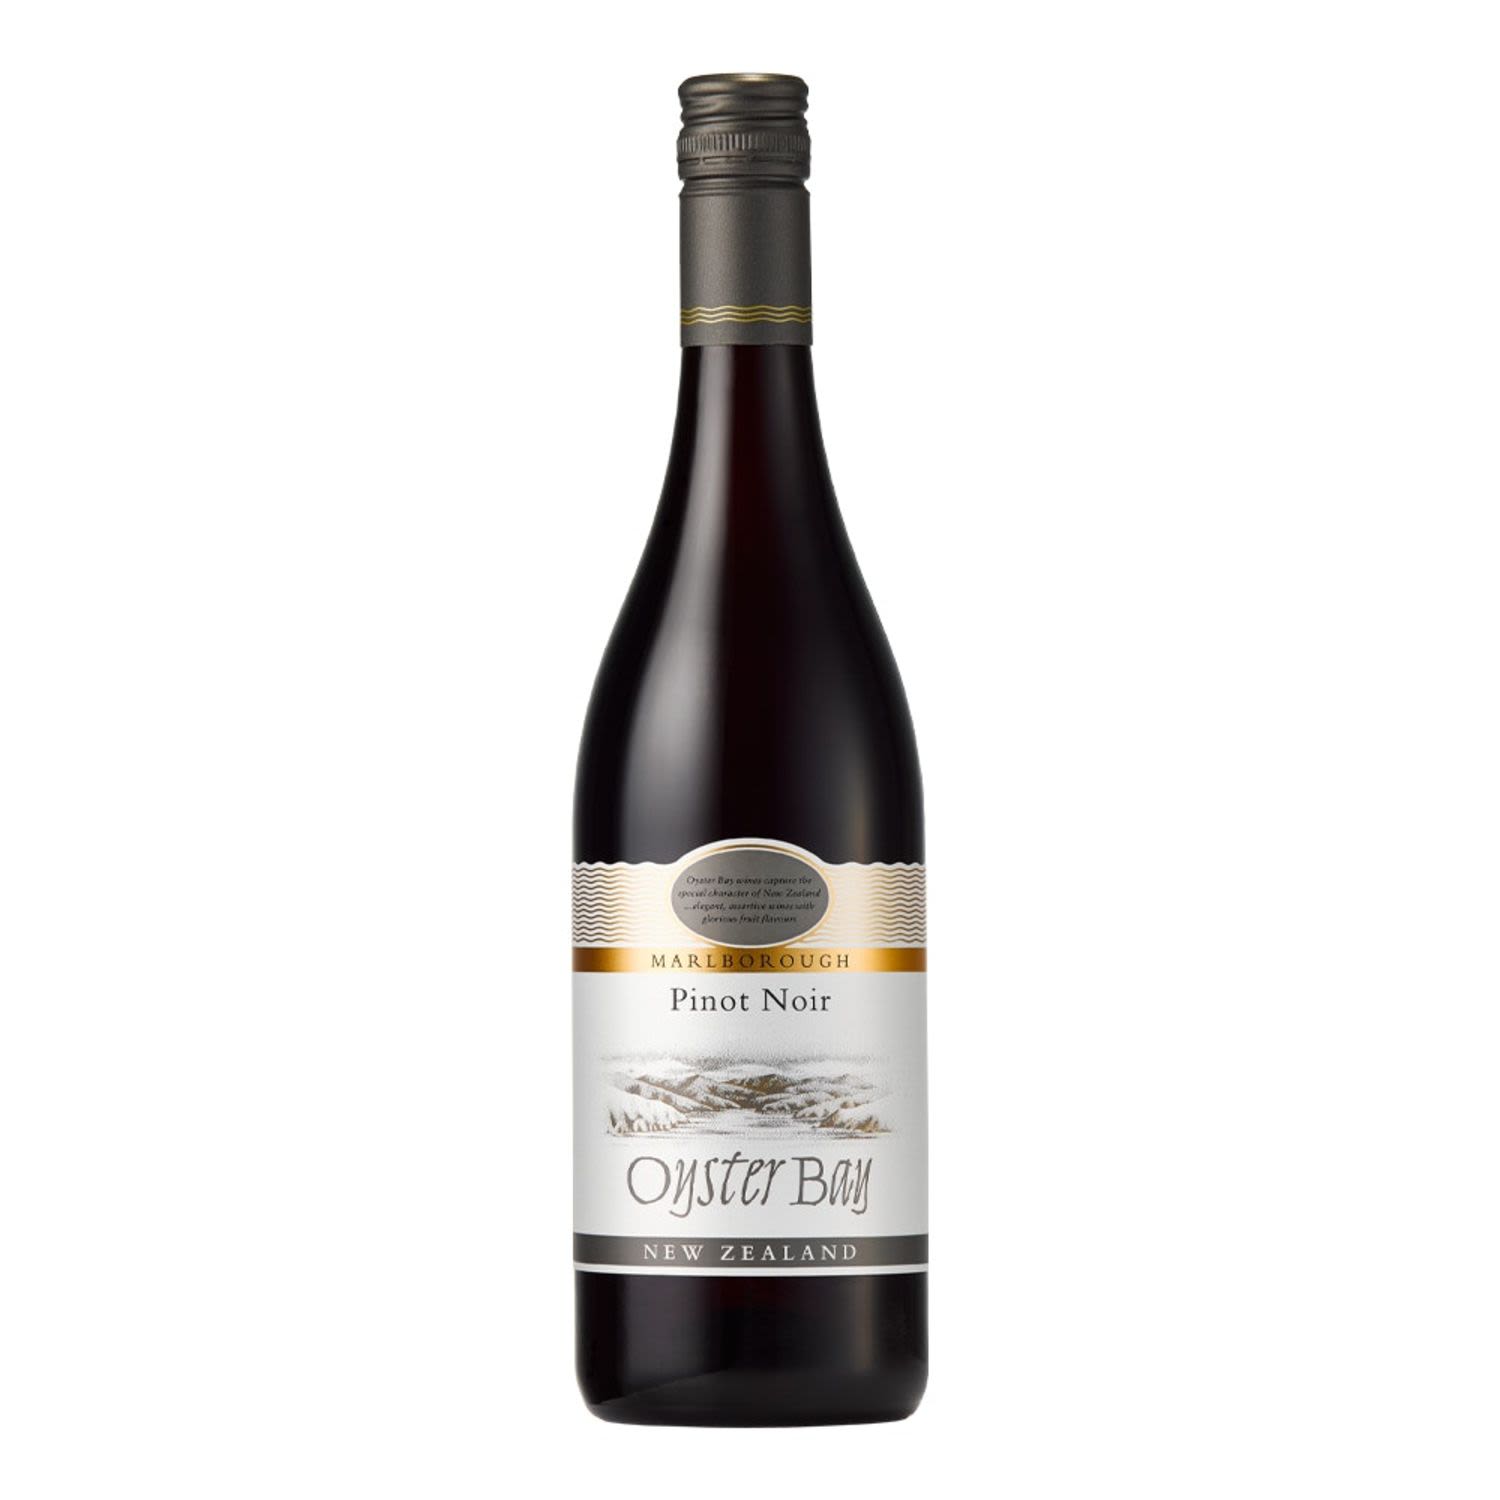 Oyster Bay Marlborough Pinot Noir is elegant cool climate Pinot Noir at its best. Fragrant, soft and flavourful with aromas of ripe cherries and sweet fruit tannins that provide structure and length.<br /> <br />Alcohol Volume: 13.50%<br /><br />Pack Format: Bottle<br /><br />Standard Drinks: 8</br /><br />Pack Type: Bottle<br /><br />Country of Origin: New Zealand<br /><br />Region: Marlborough<br /><br />Vintage: '2018<br />